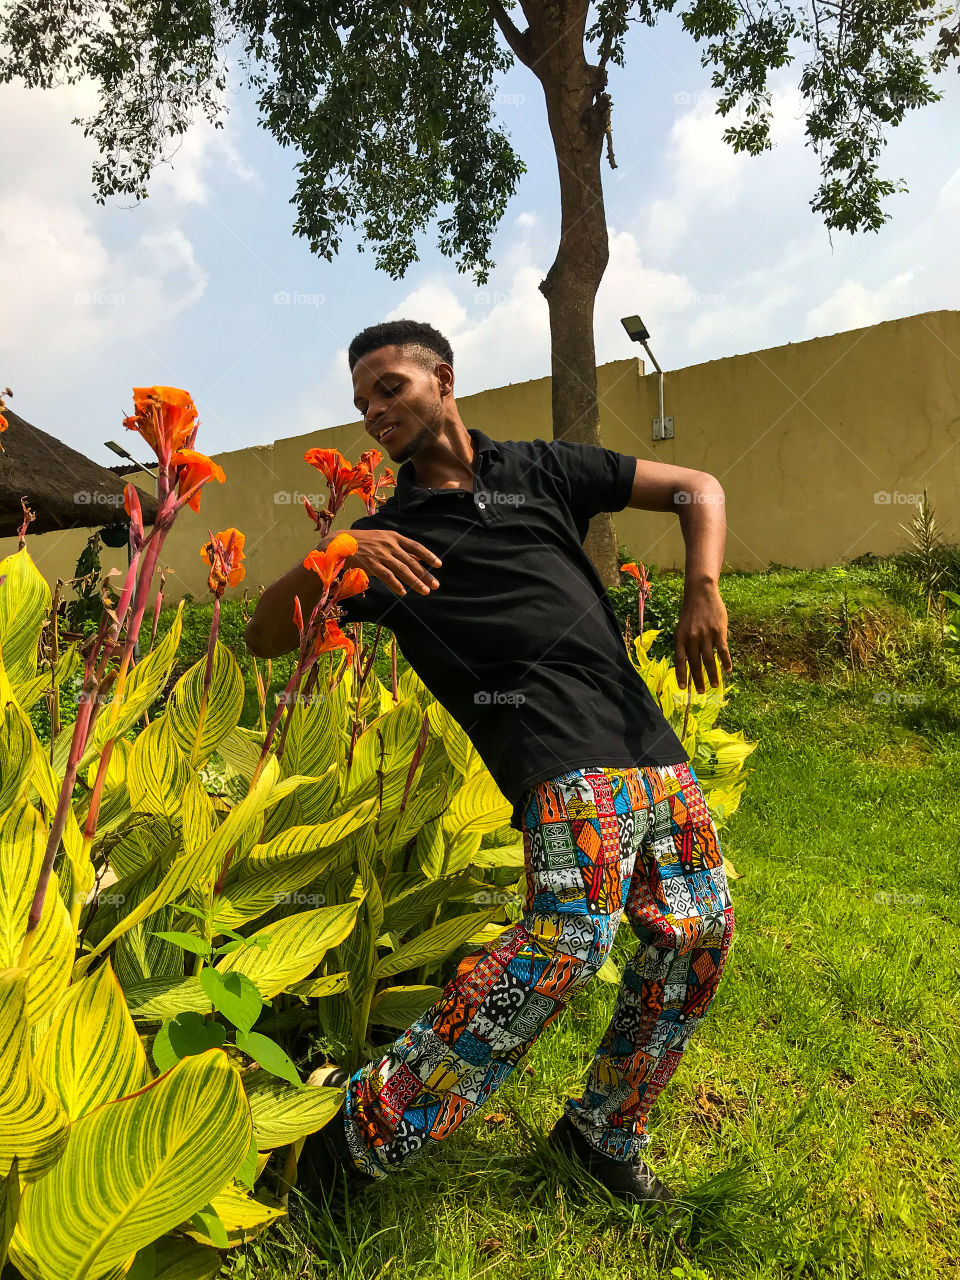 Man dancing in nature with flowers and blue sky 